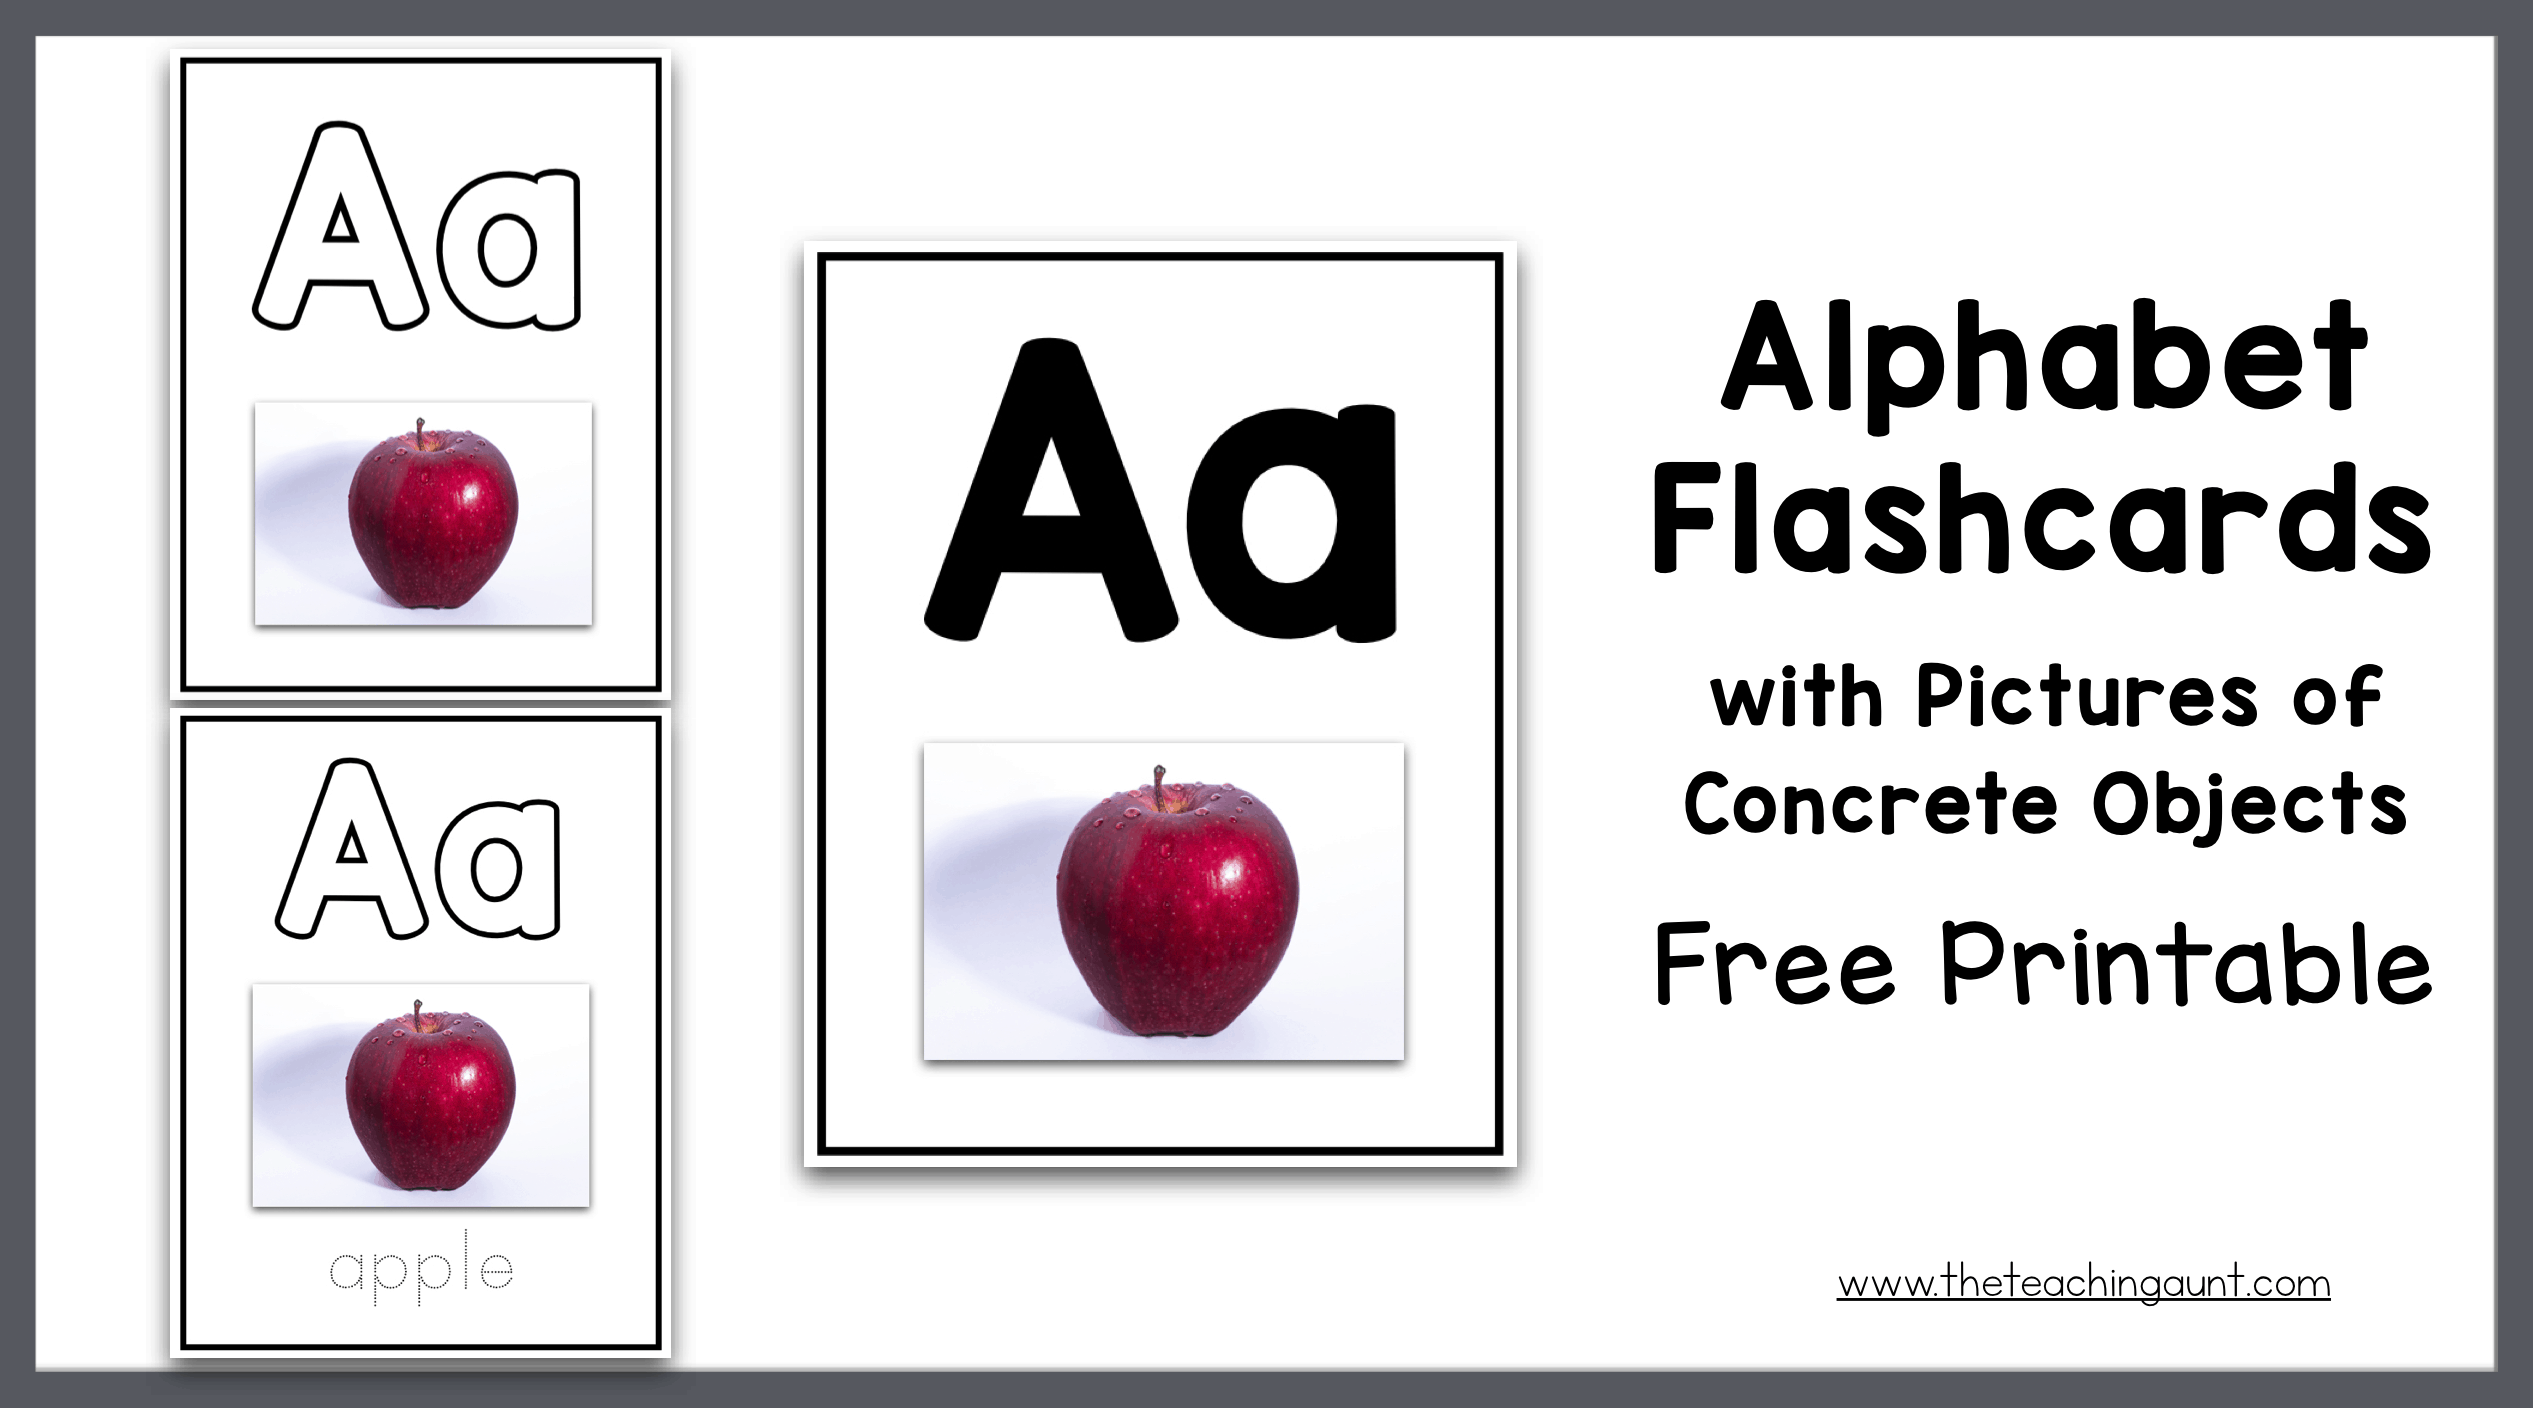 Alphabet Flashcards With Pictures Of Concrete Objects The Teaching Aunt - Free Printable Abc Flashcards With Pictures